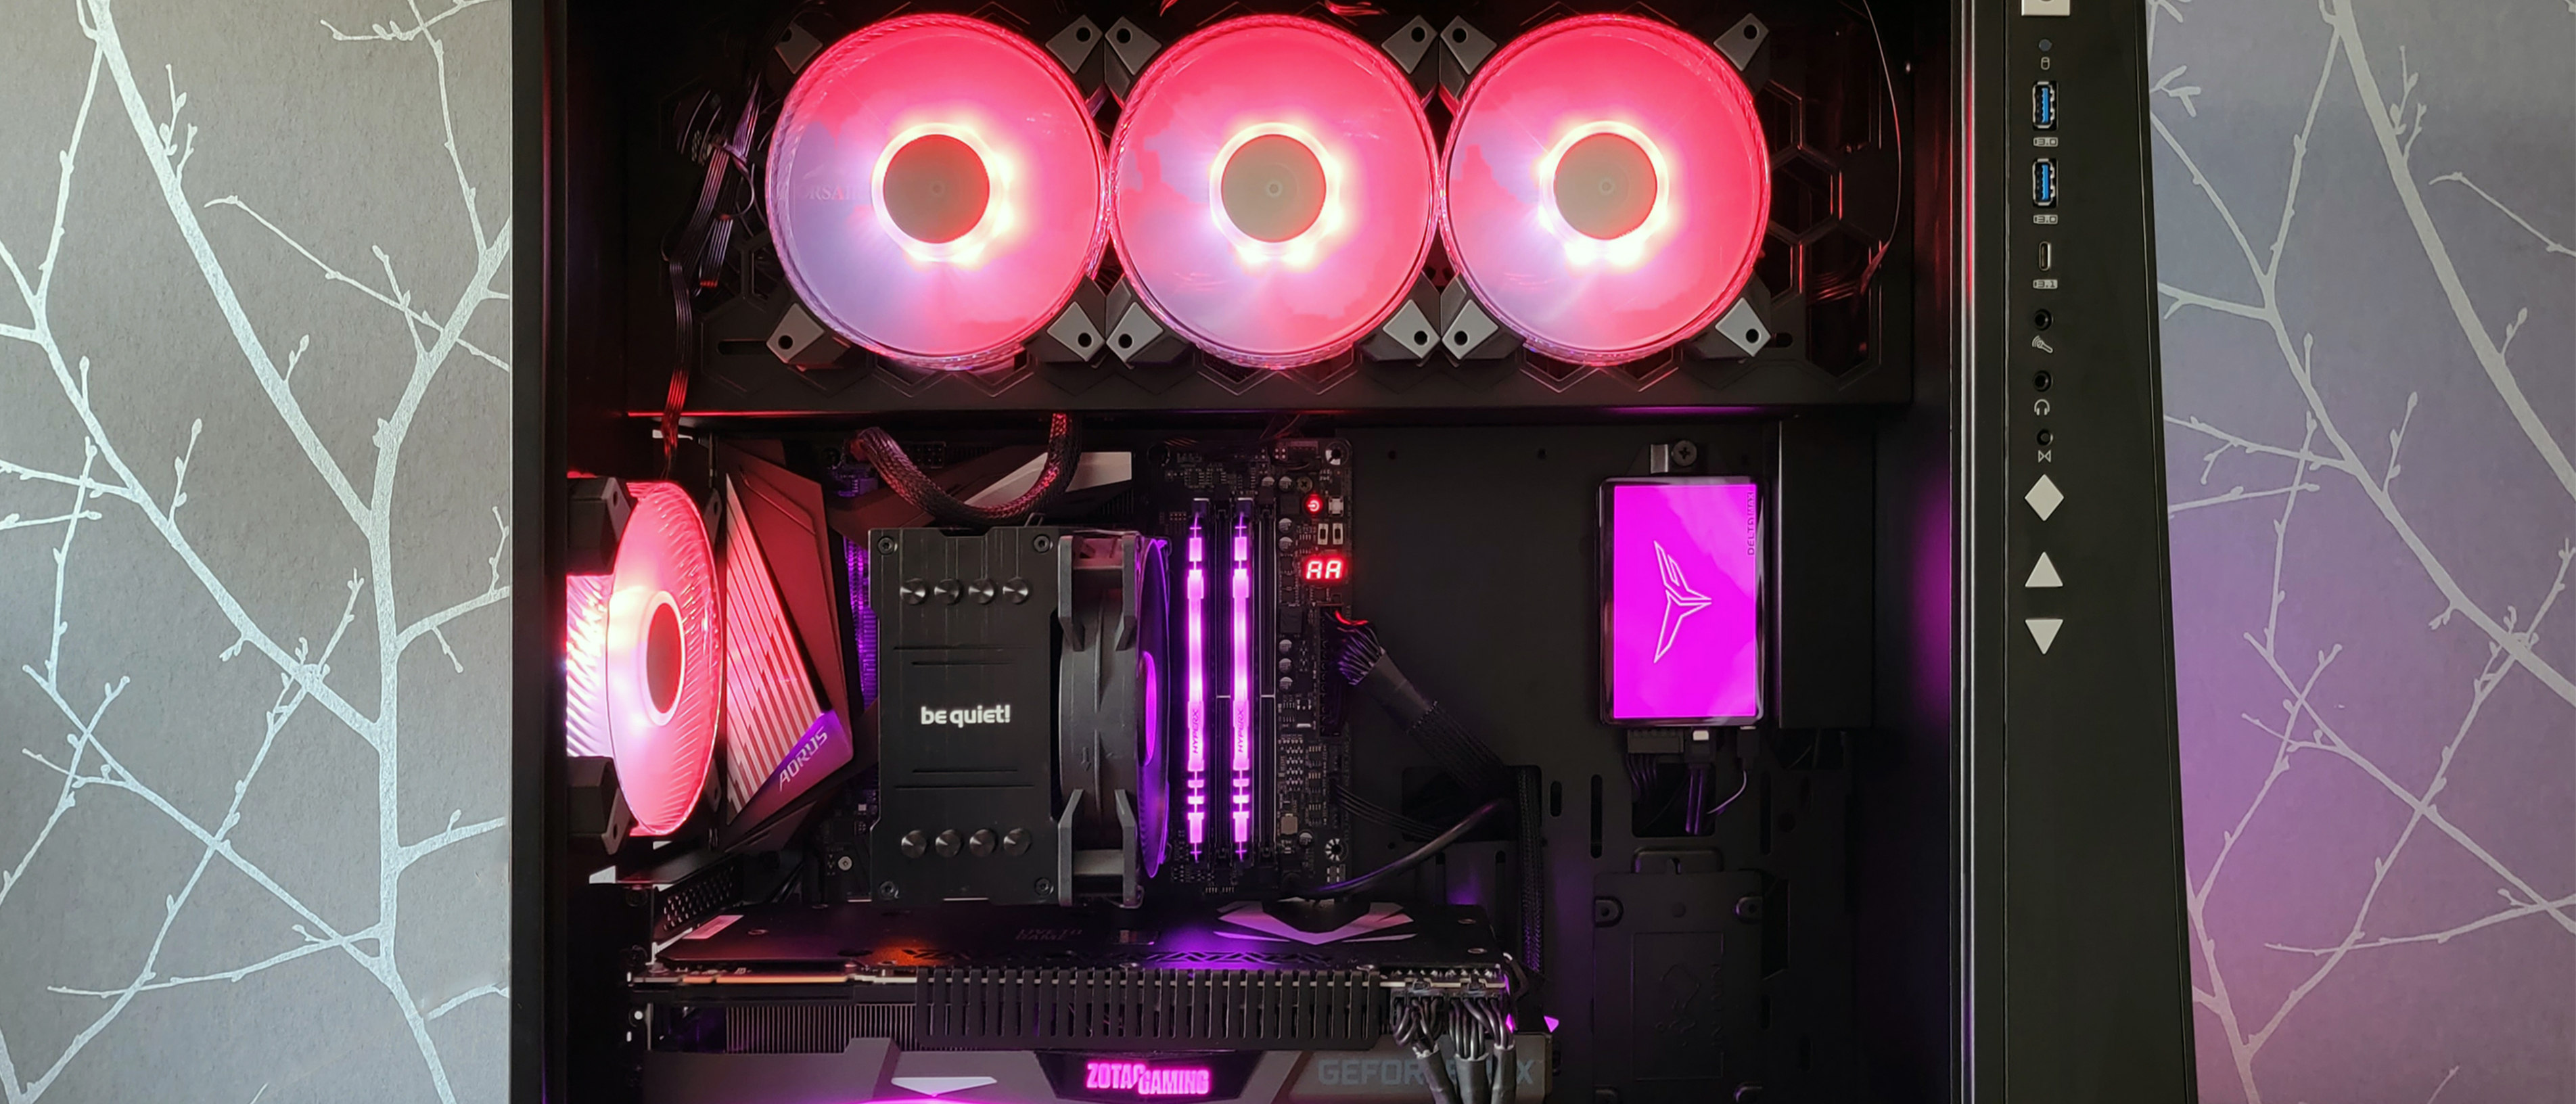 Best PC Builds for Gaming: From Sub $500 Budgets to